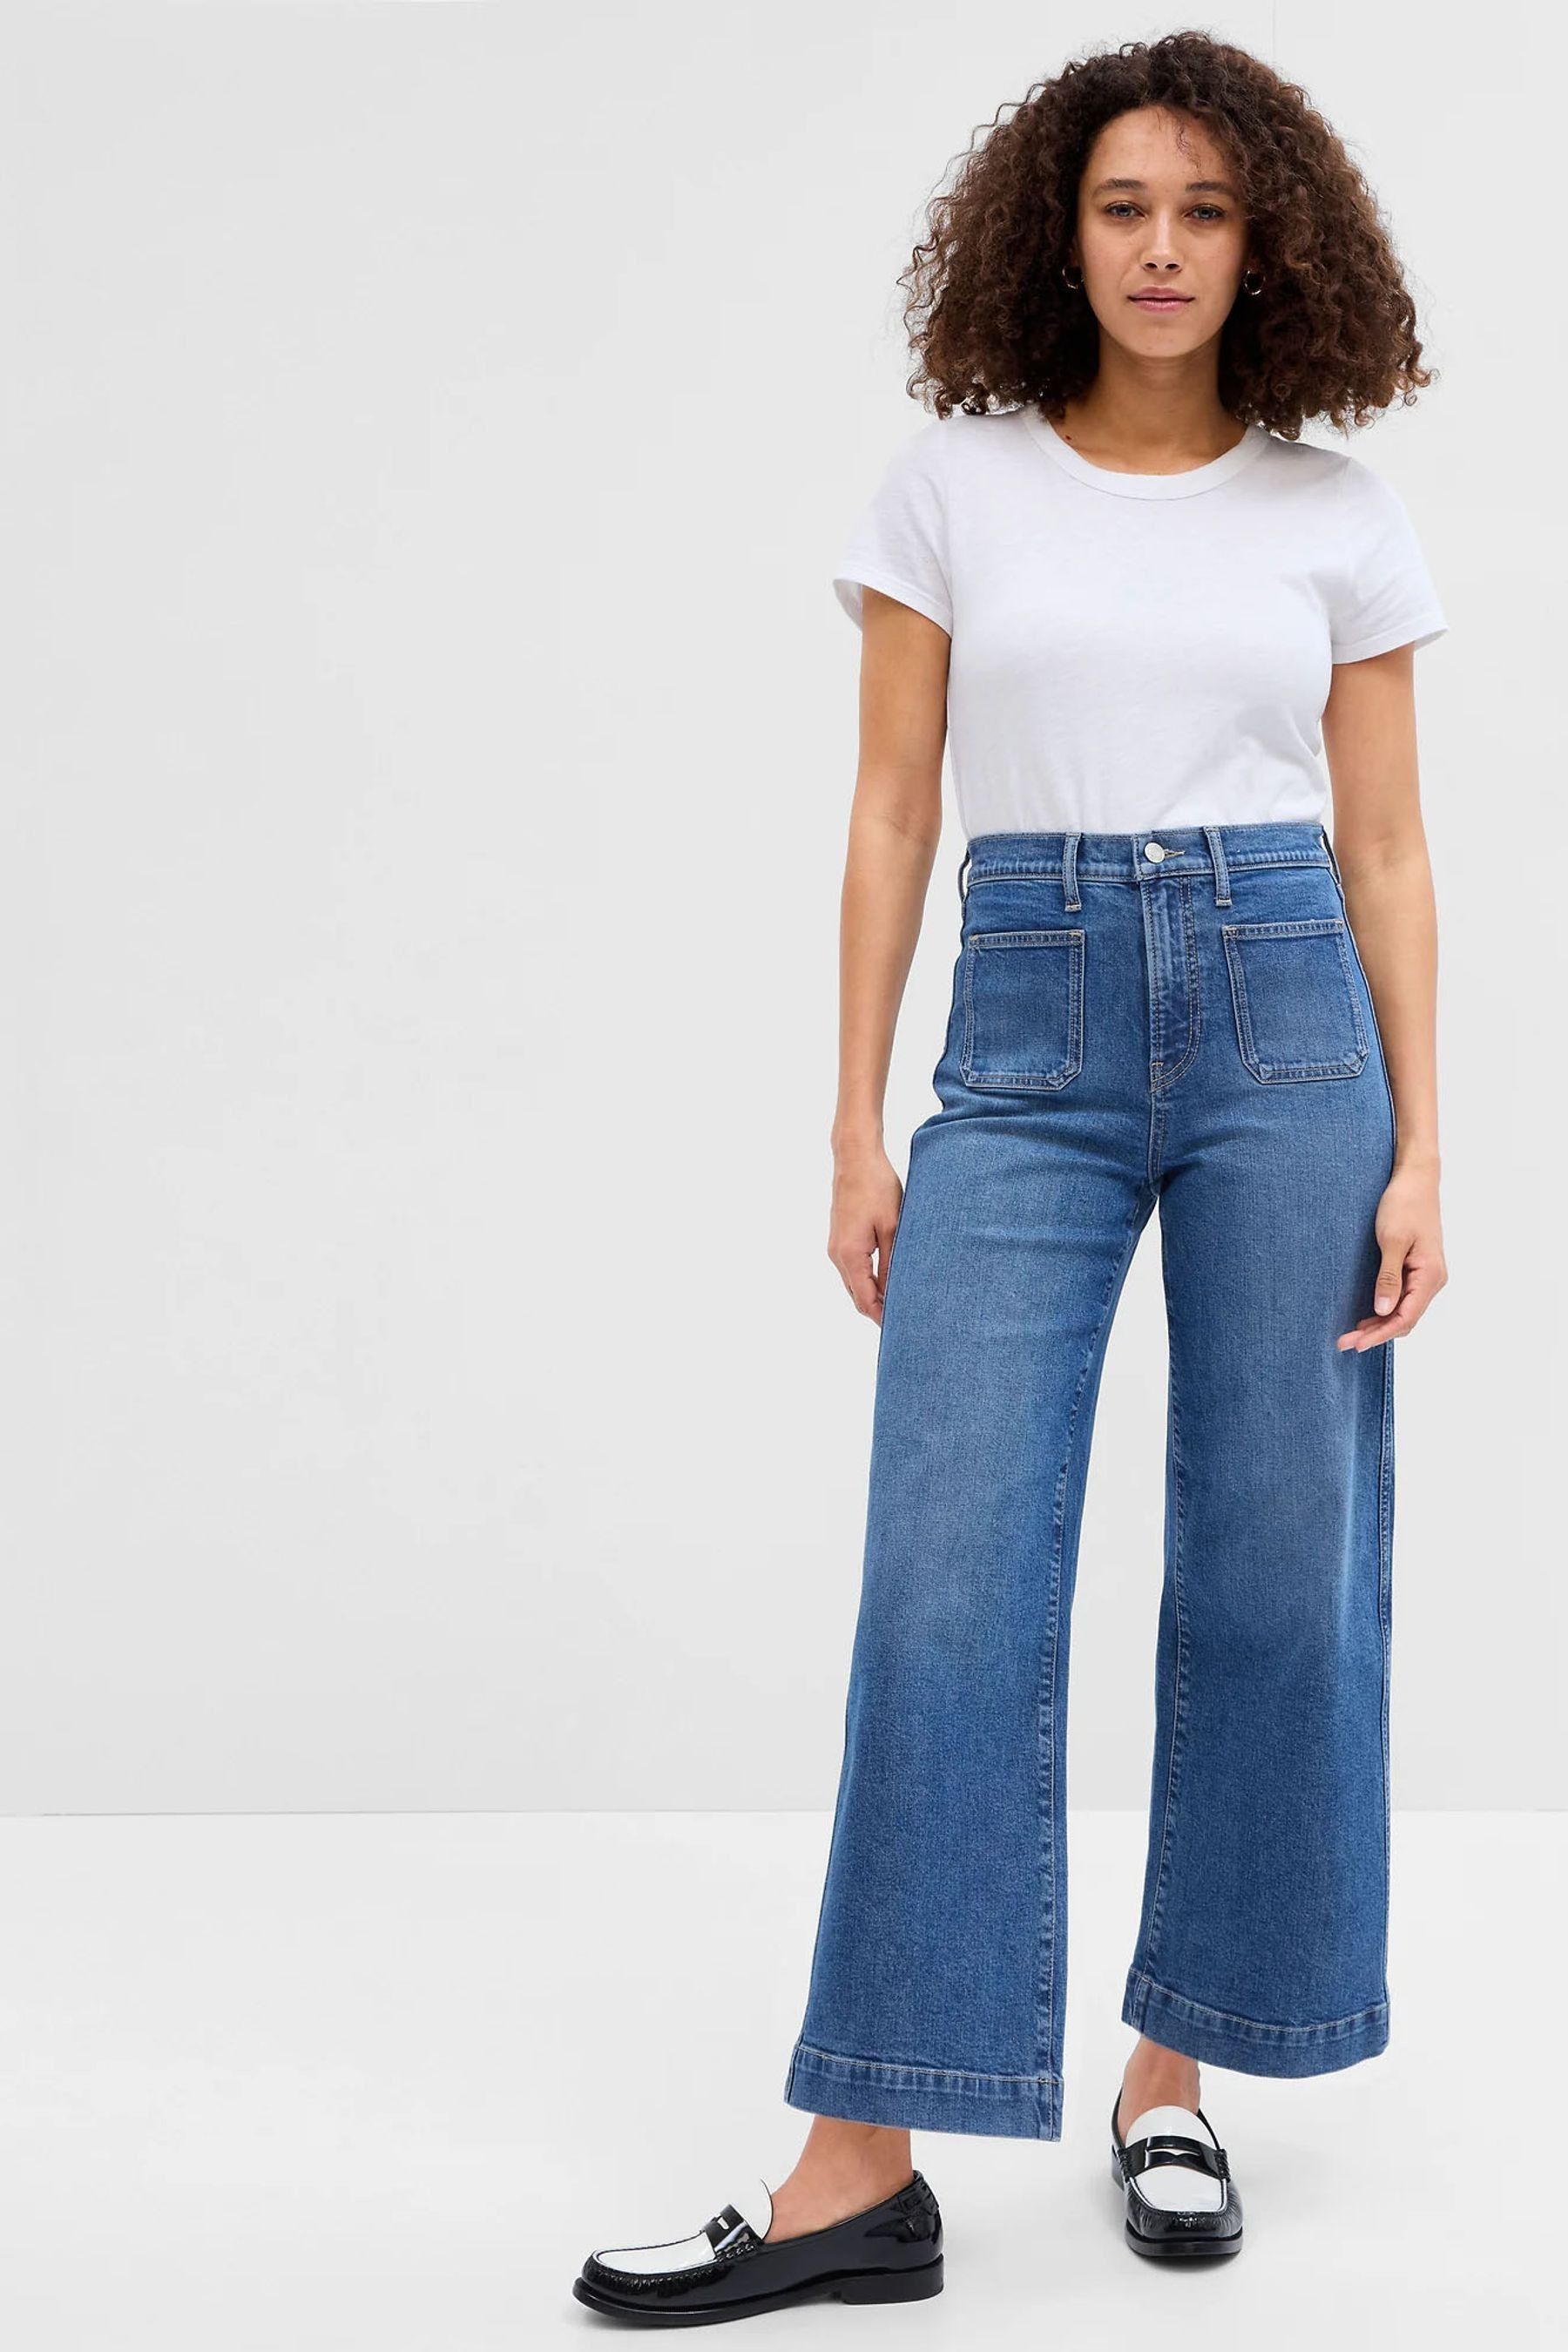 Buy Gap High Waisted Wide Leg Cropped Jeans from the Gap online shop